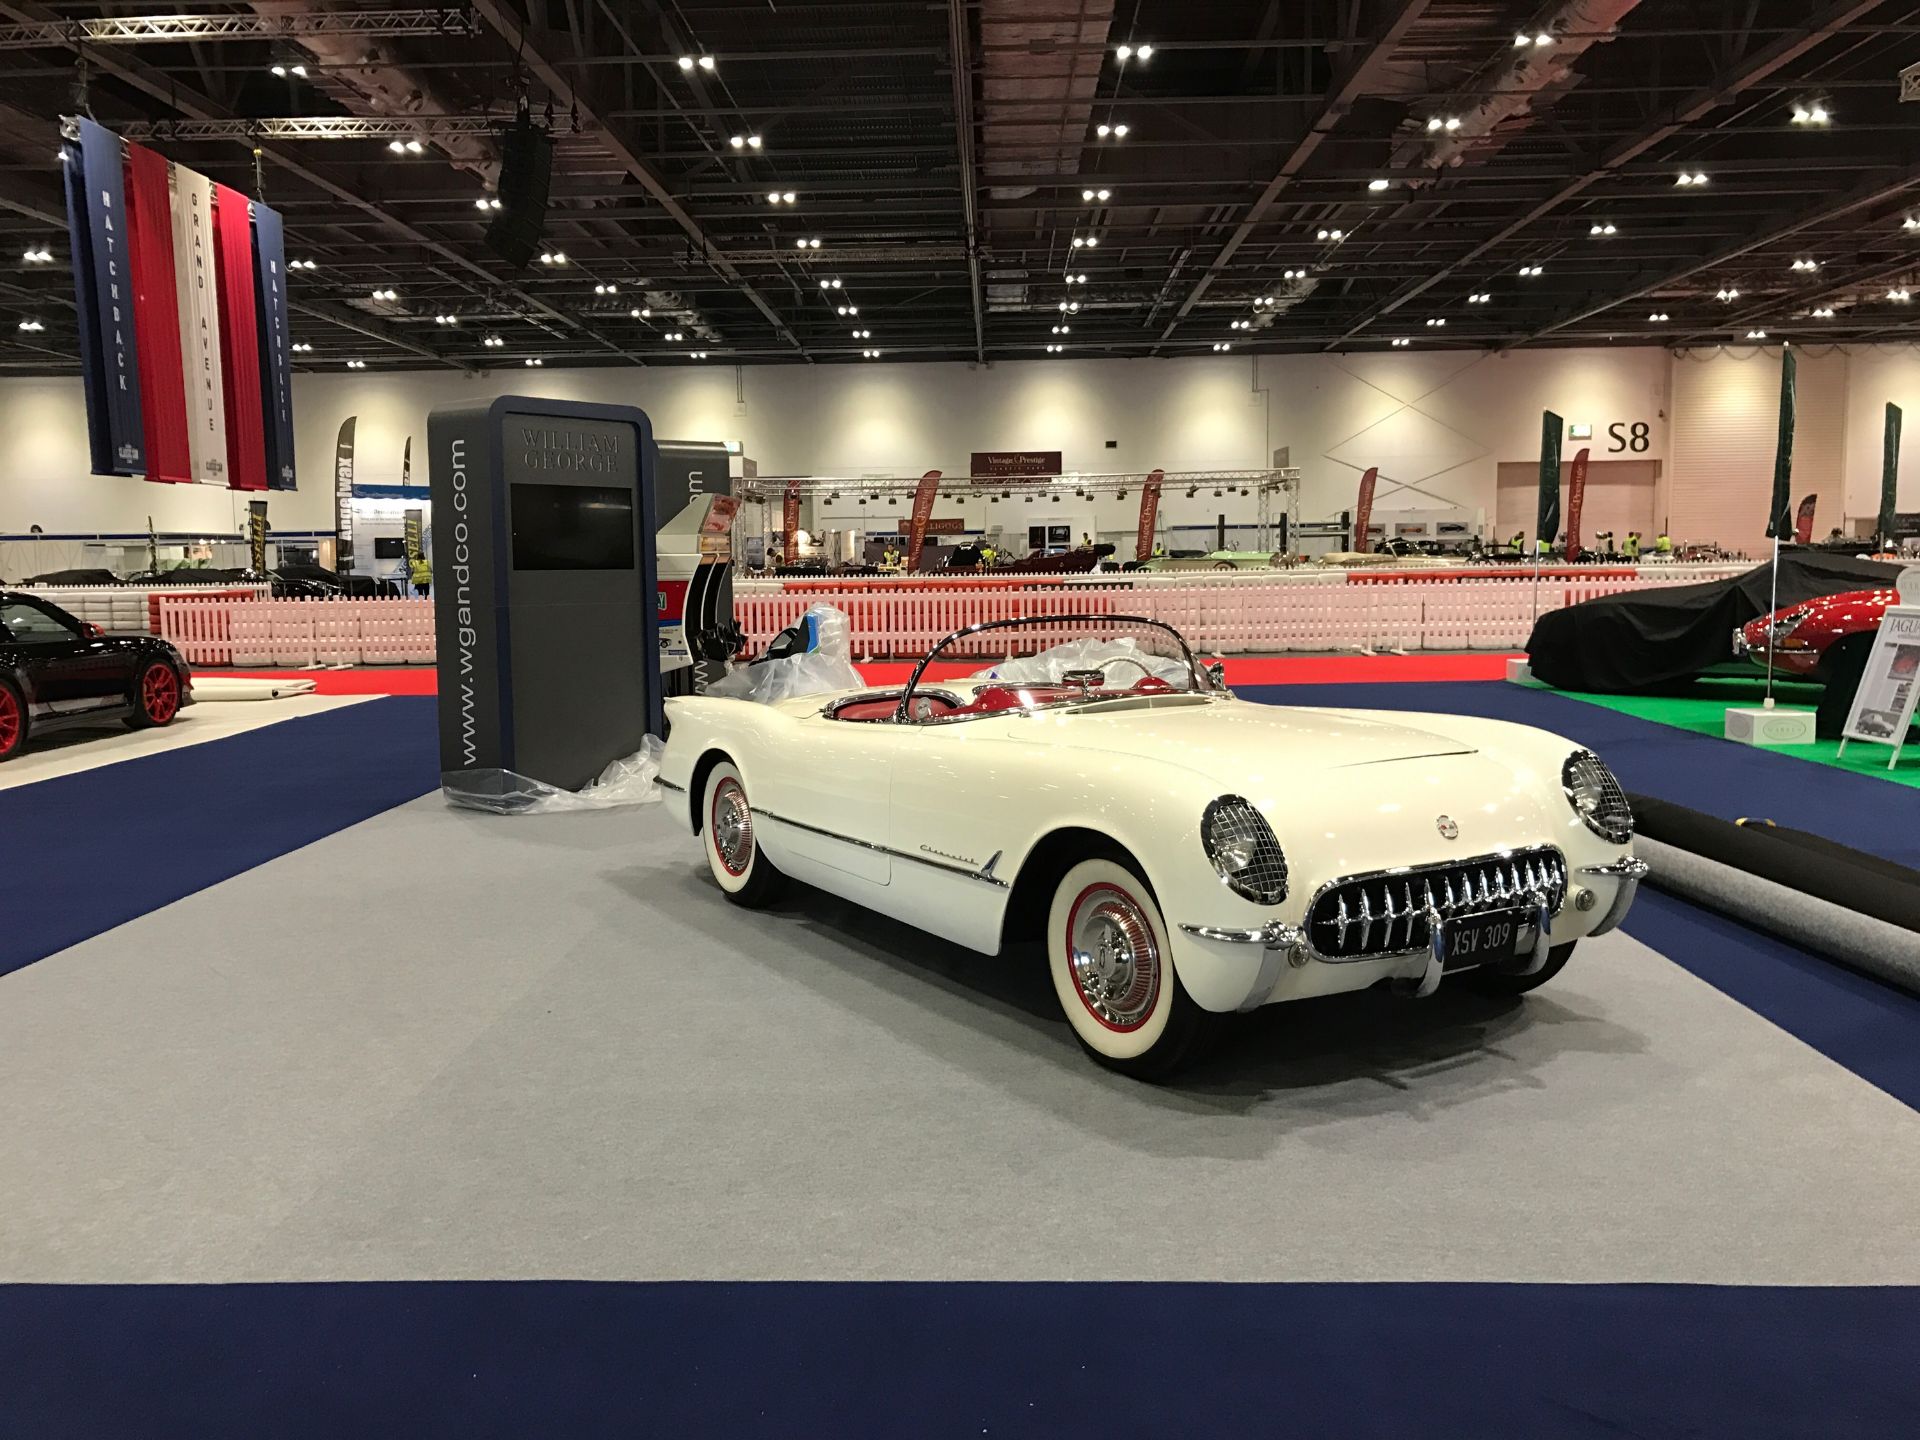 Believed To Be The Only Road Legal, 1954 Corvette In The UK ***NO RESERVE*** - Featured at the LCCS